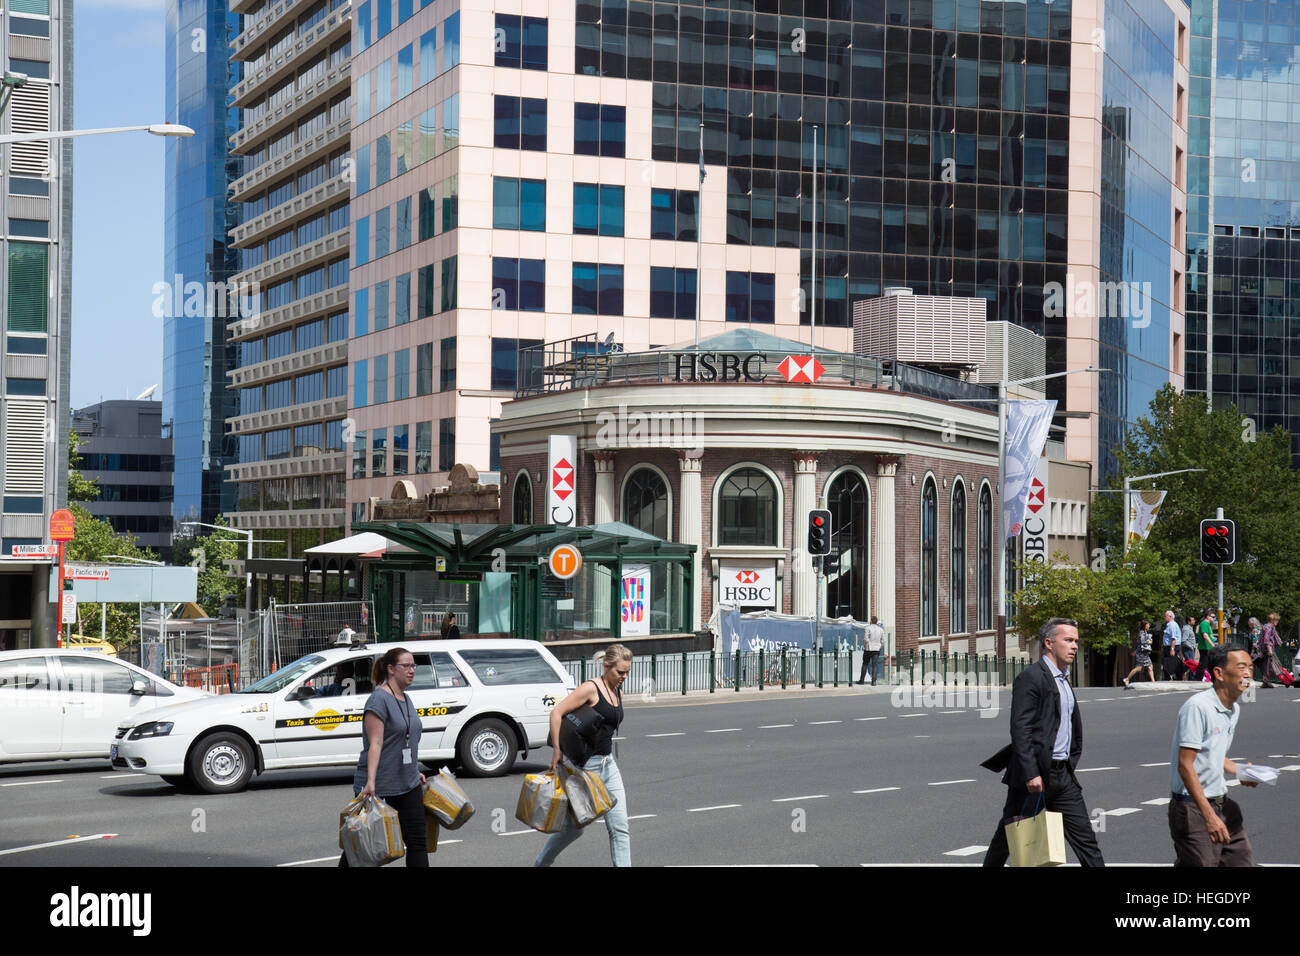 North Sydney city centre with HSBC bank branch and entrance to train station,Sydney,Australia Stock Photo